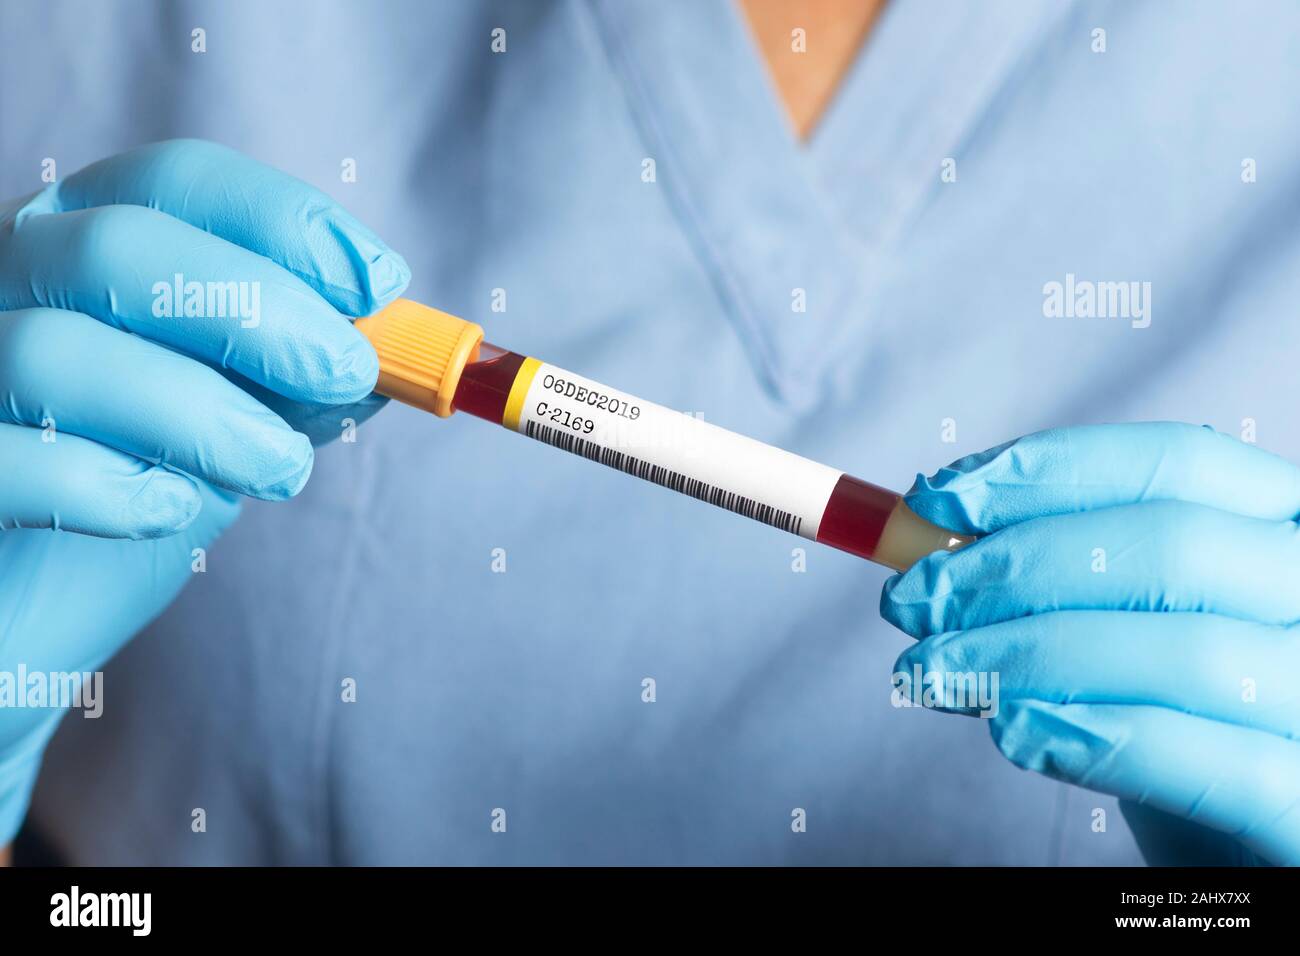 Laboratory technician holds blood sample tube with gold colored cap.  Gold test tubes are used for tests such as hepatic function panes. Stock Photo